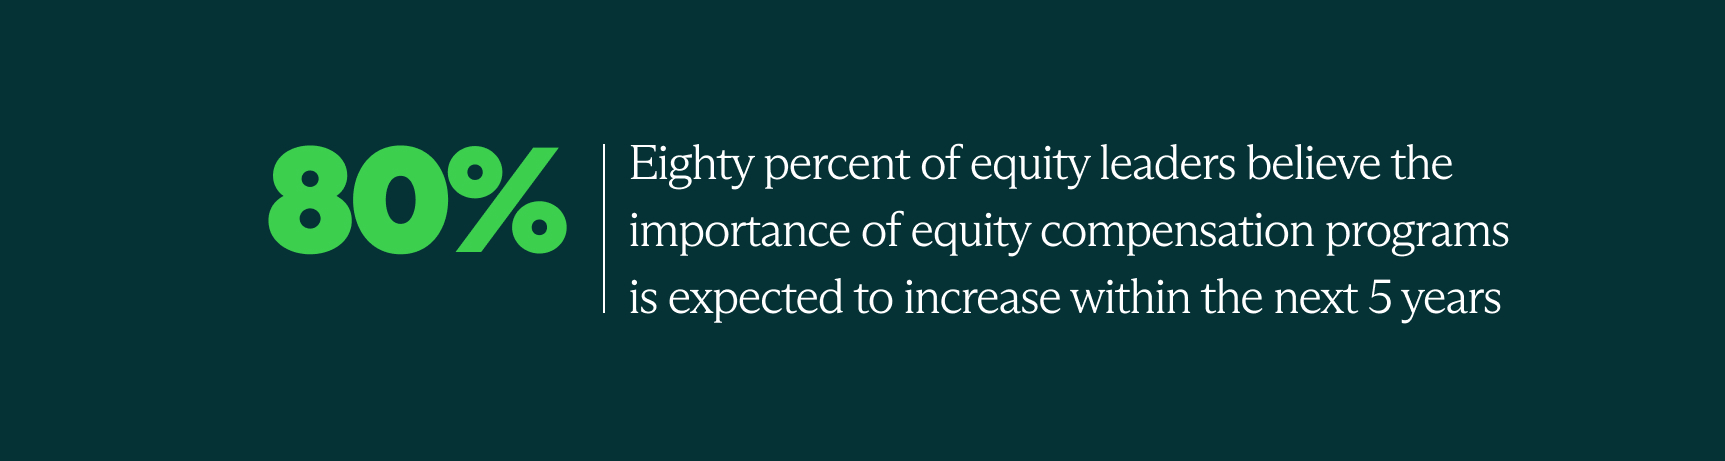 80% of equity leaders believe the importance of compensation programs is expected to increase in the next 5 years.